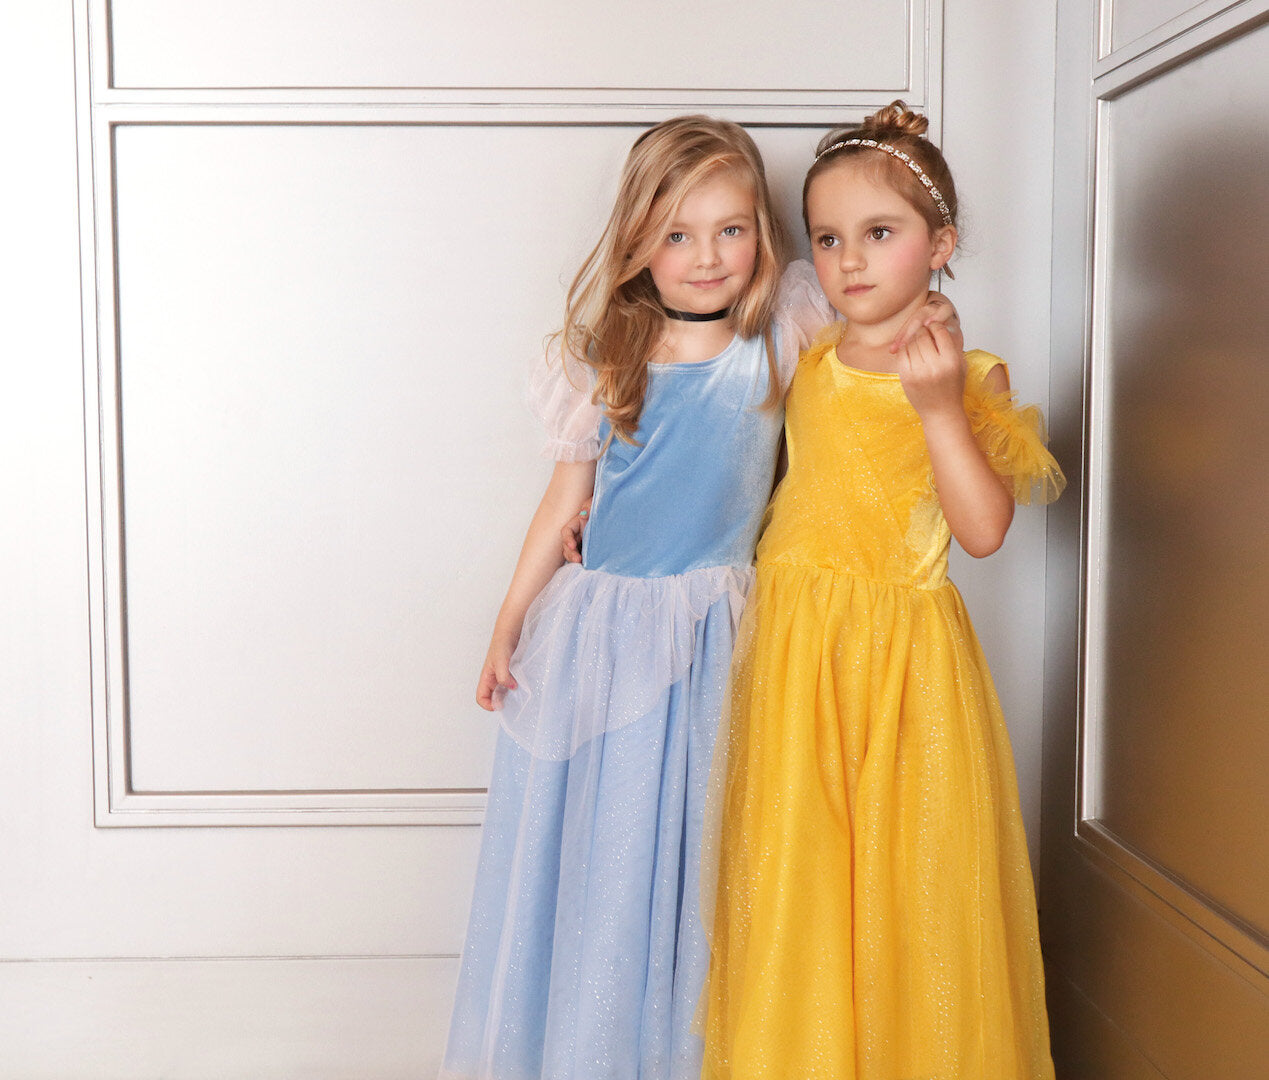 Belle Dress / Disney Princess Dress Beauty and the Beast Belle Costume /  Yellow Dress / Ball Gown for Toddler, Child, Girl Princess Costume -   Finland